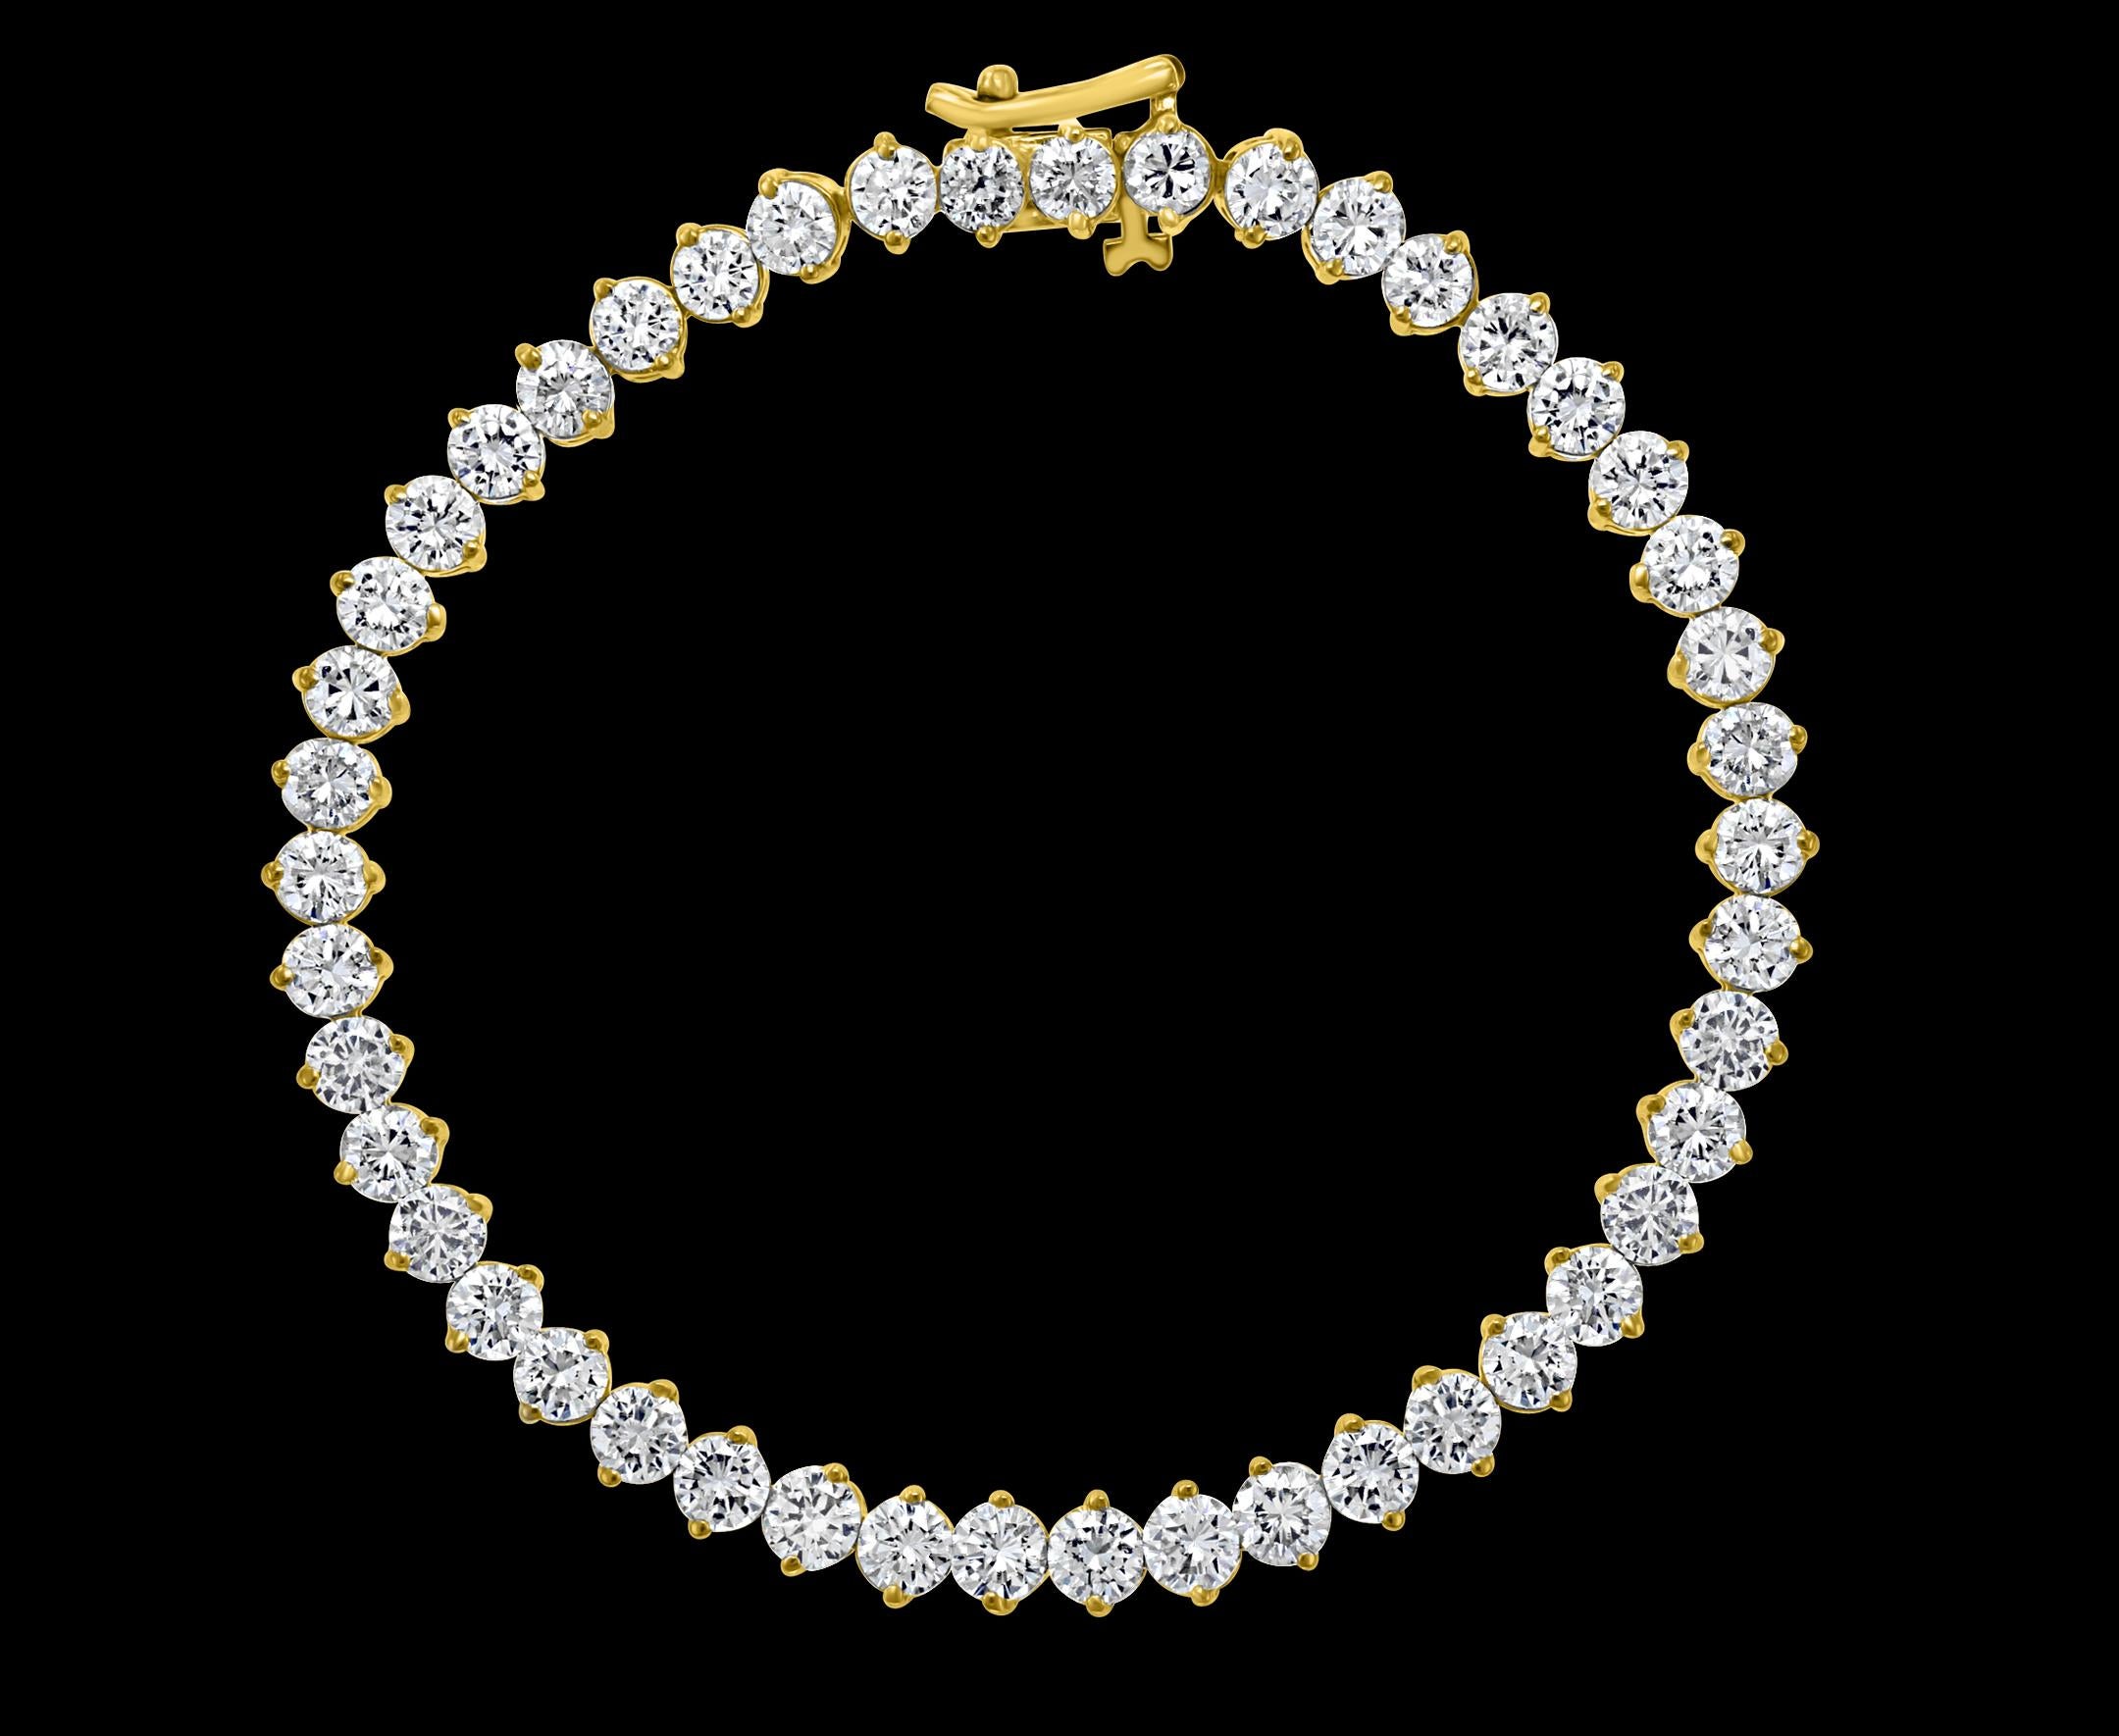 
45 Round Diamond 25 Pointer Each Tennis Bracelet in 18 K Yellow Gold 11.25 Ct Line Bracelet
Meet the ultimate bold tennis bracelet. The single row of prong set Round Brilliant cut Diamonds.
25 pointer each , 45 Total pieces approximately 11.25